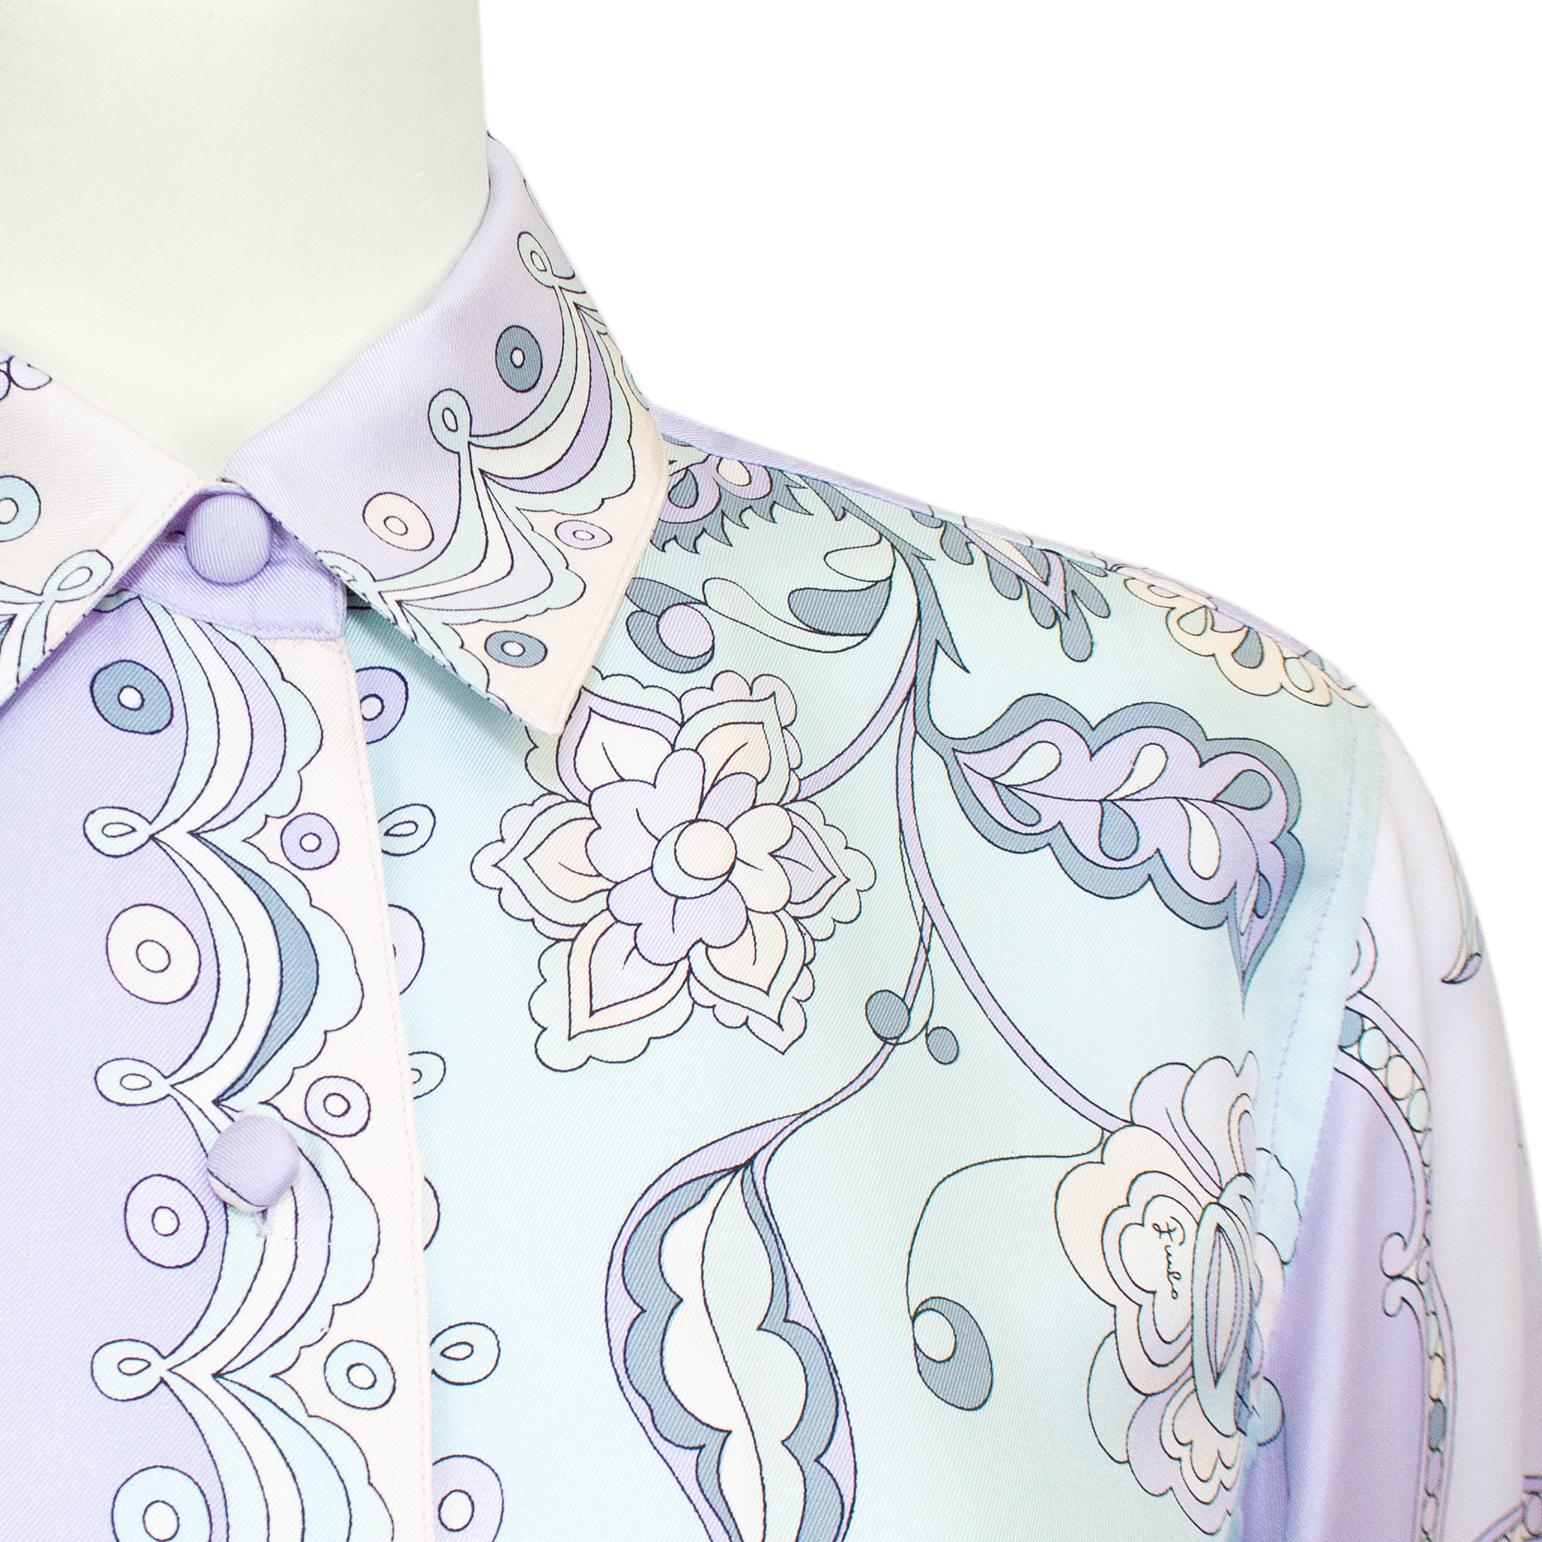 1990s Emilio Pucci Pastel Floral Silk Shirt  In Good Condition For Sale In Toronto, Ontario